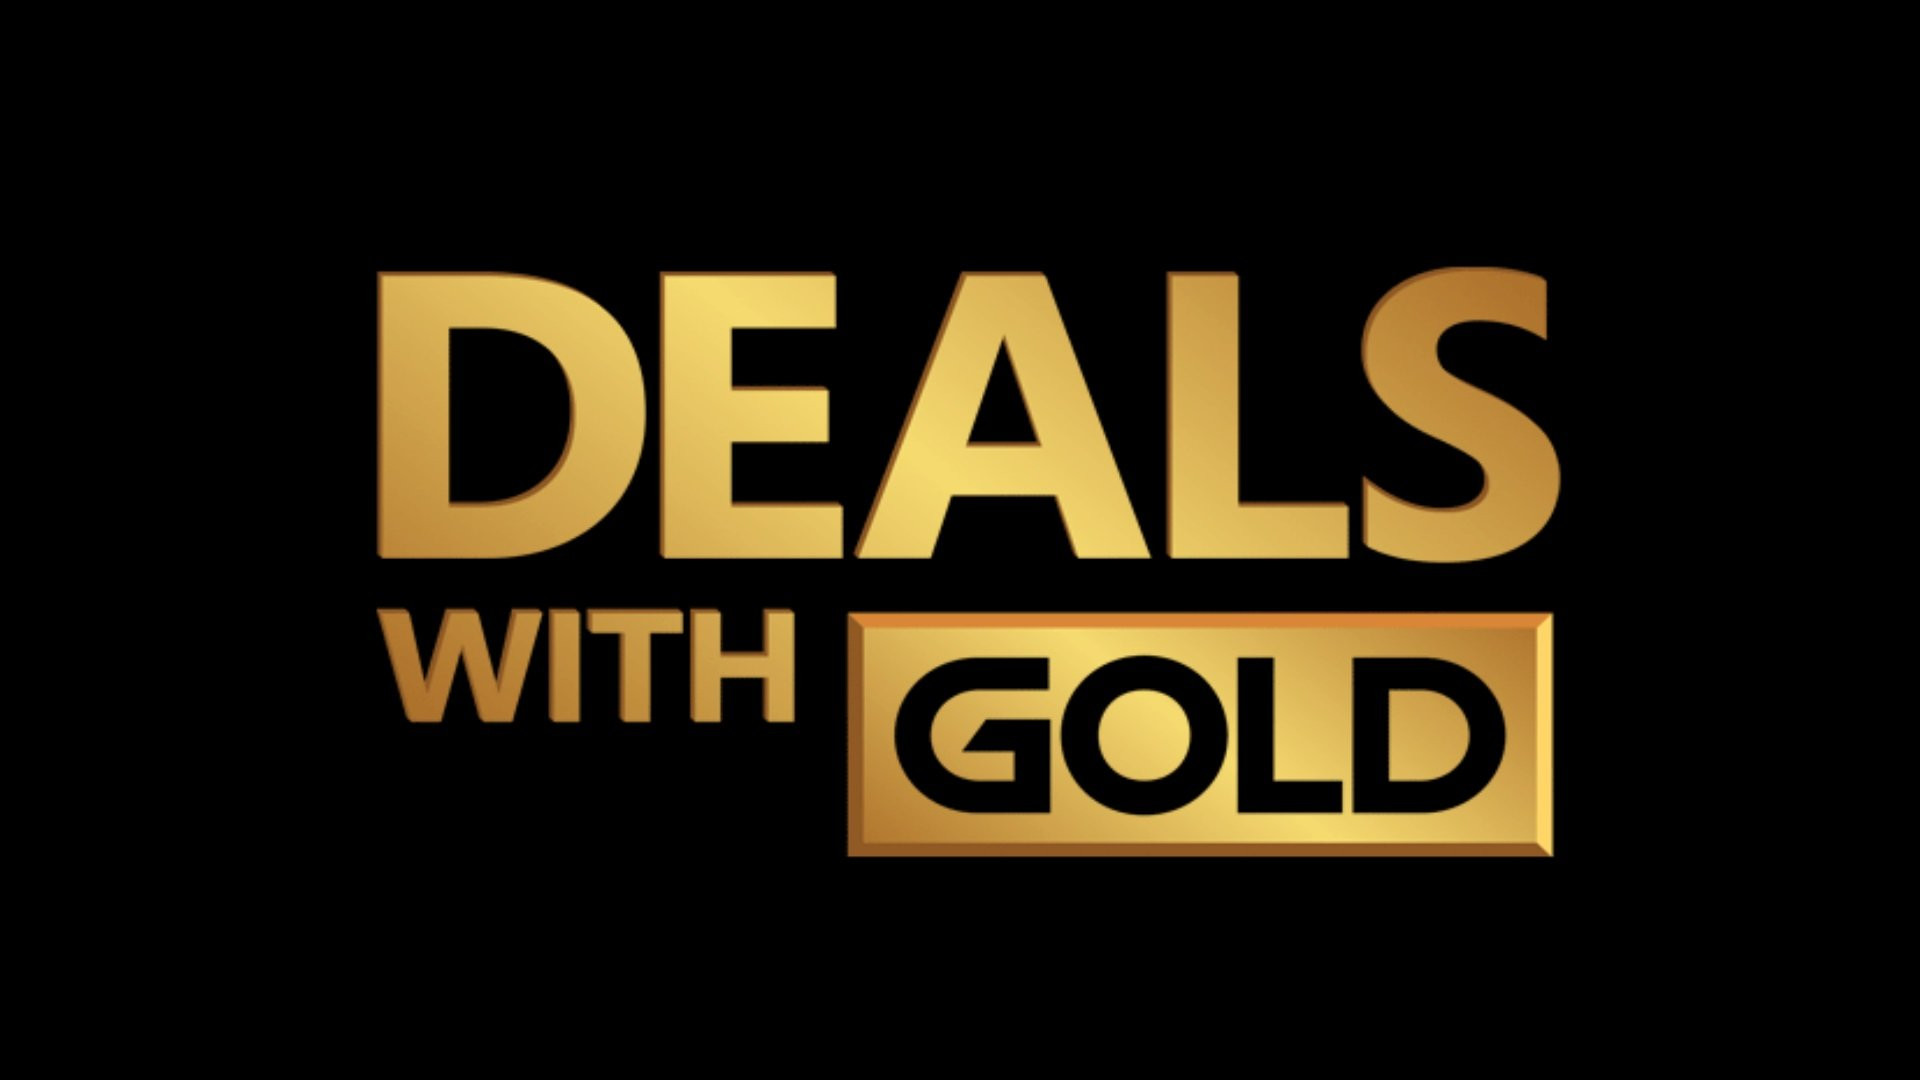 Deals with Gold semaine 24